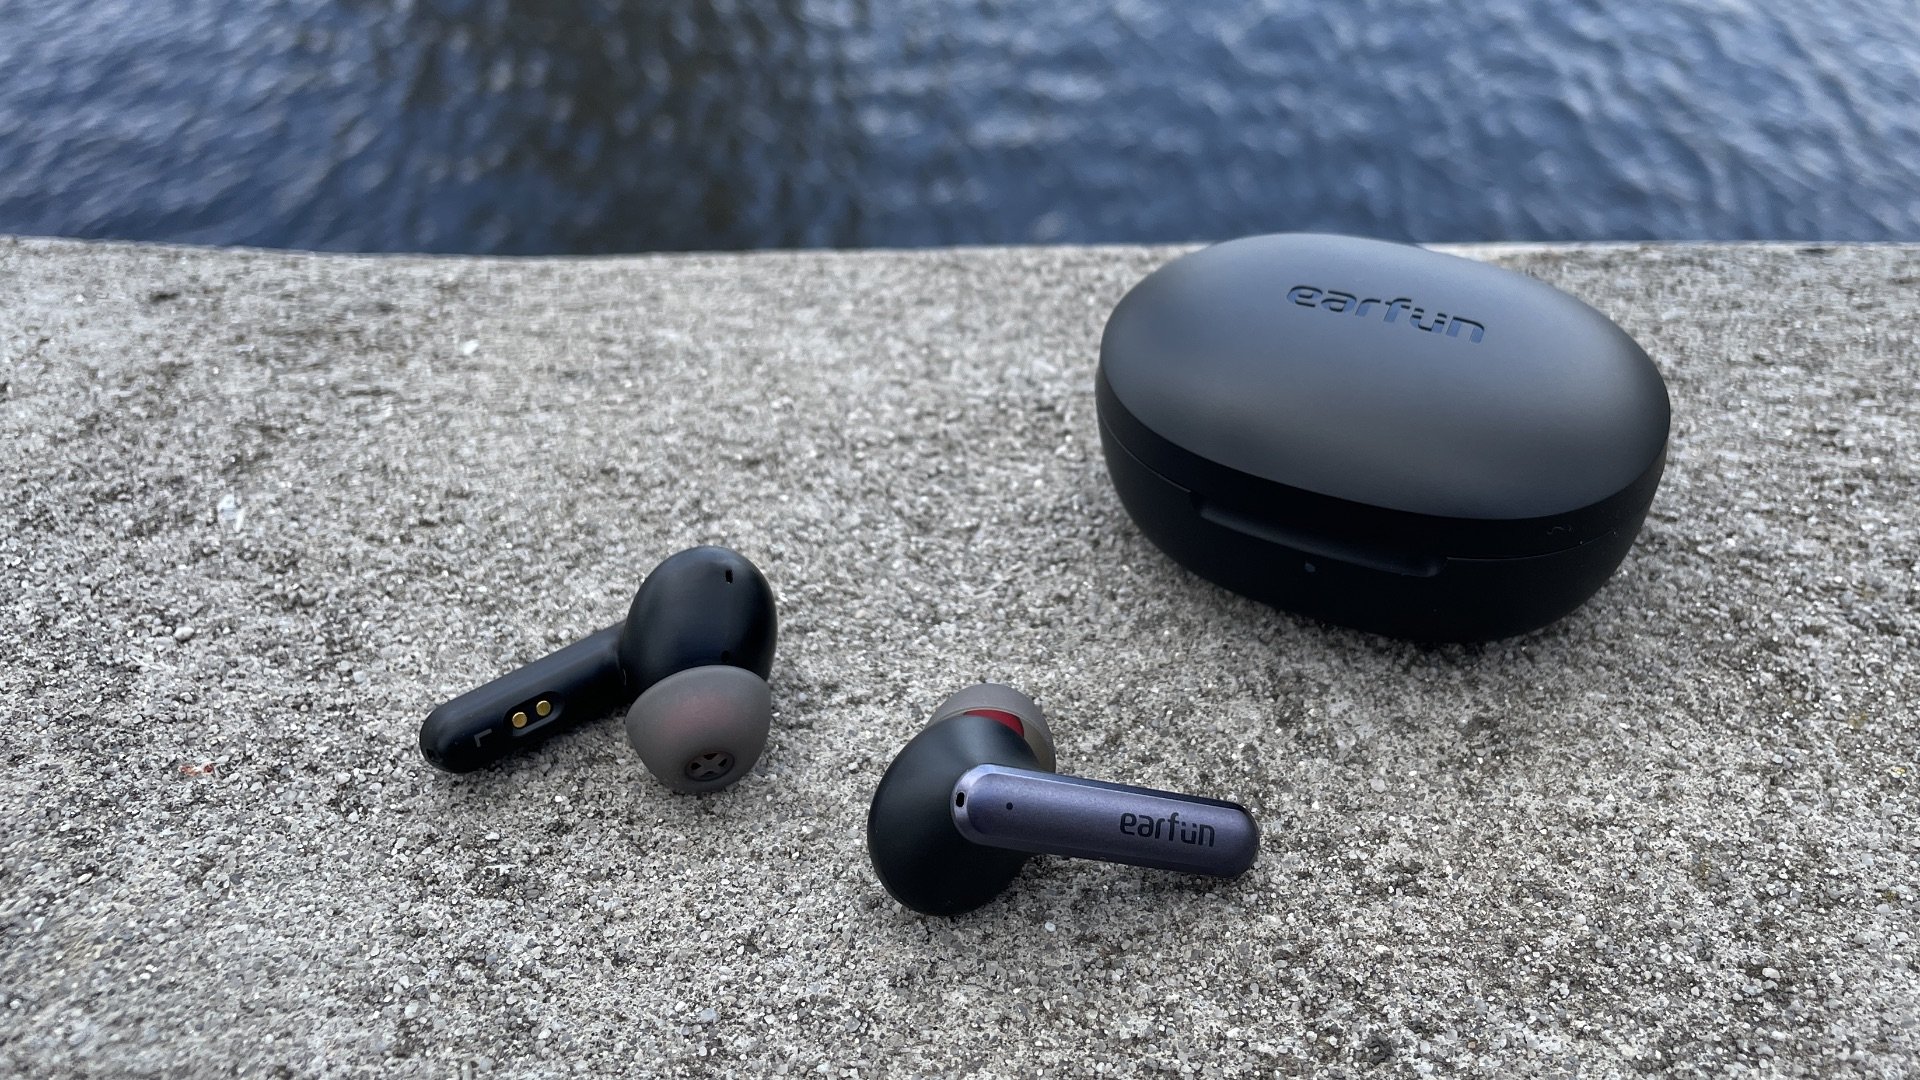 Earfun Air S review: Great multipoint earbuds on a budget